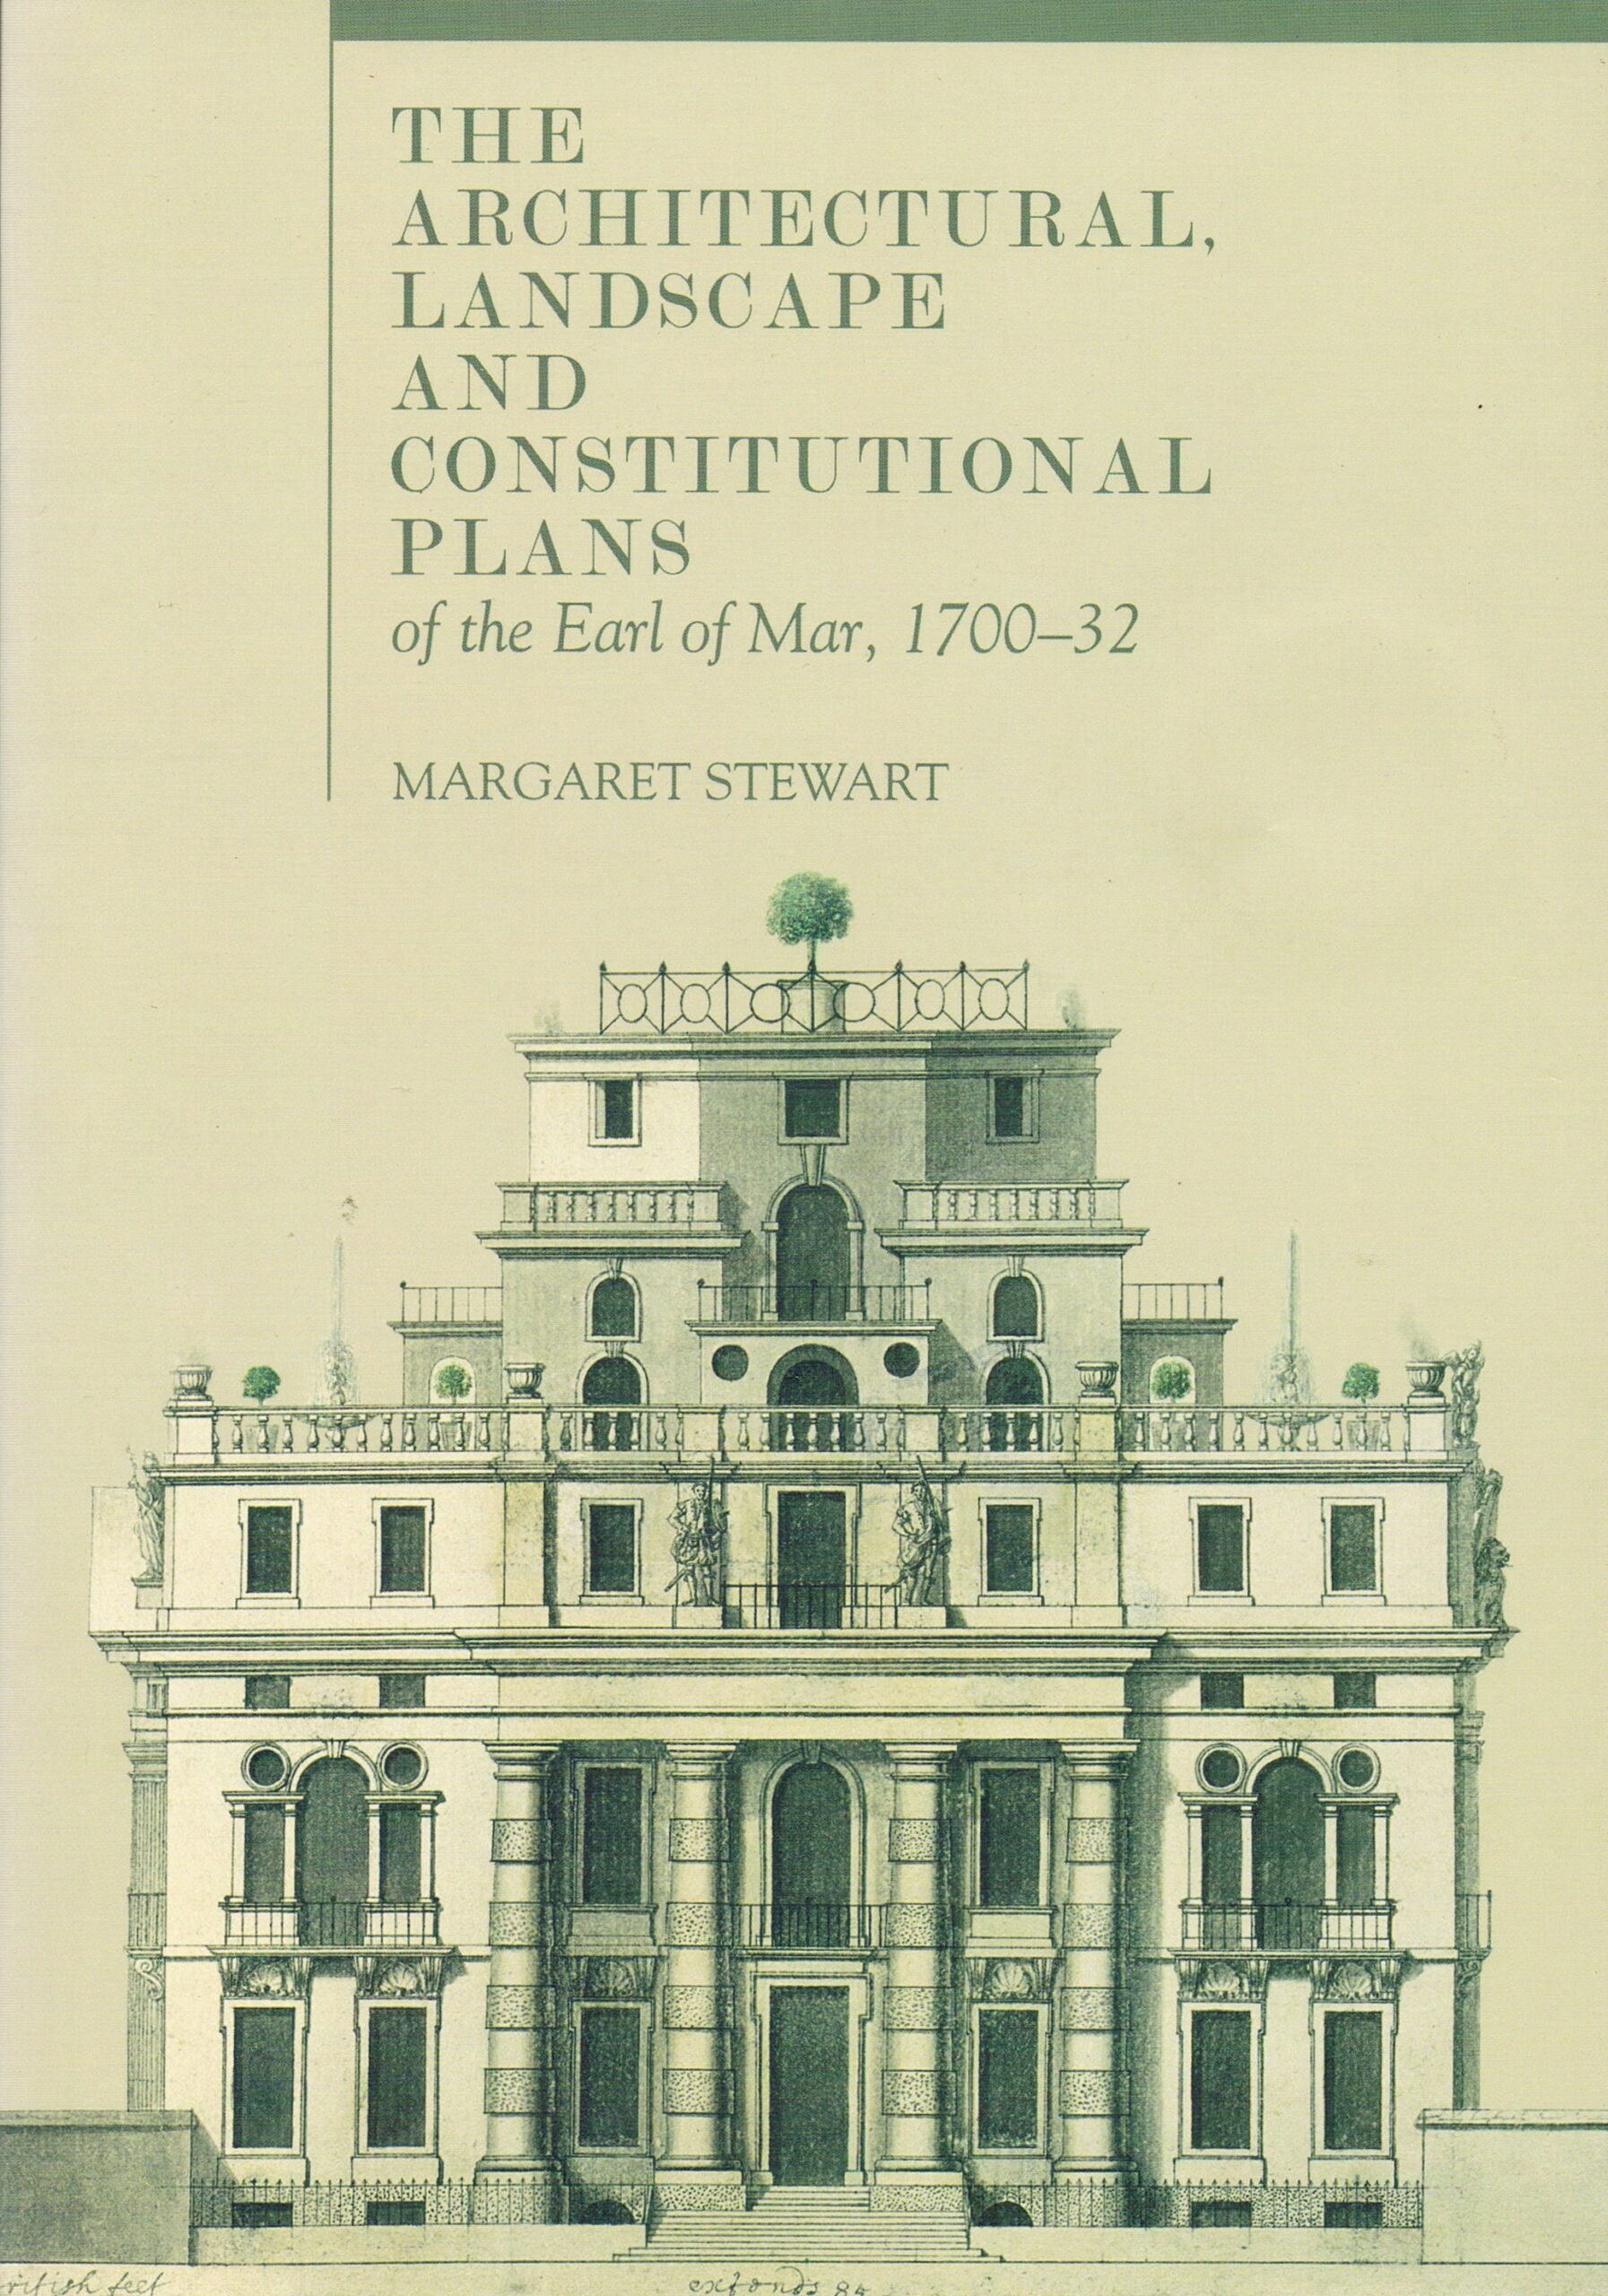 The Architectural, Landscape and Constitutional Plans of the Earl of Mar, 1700-32 by Margaret Stewart